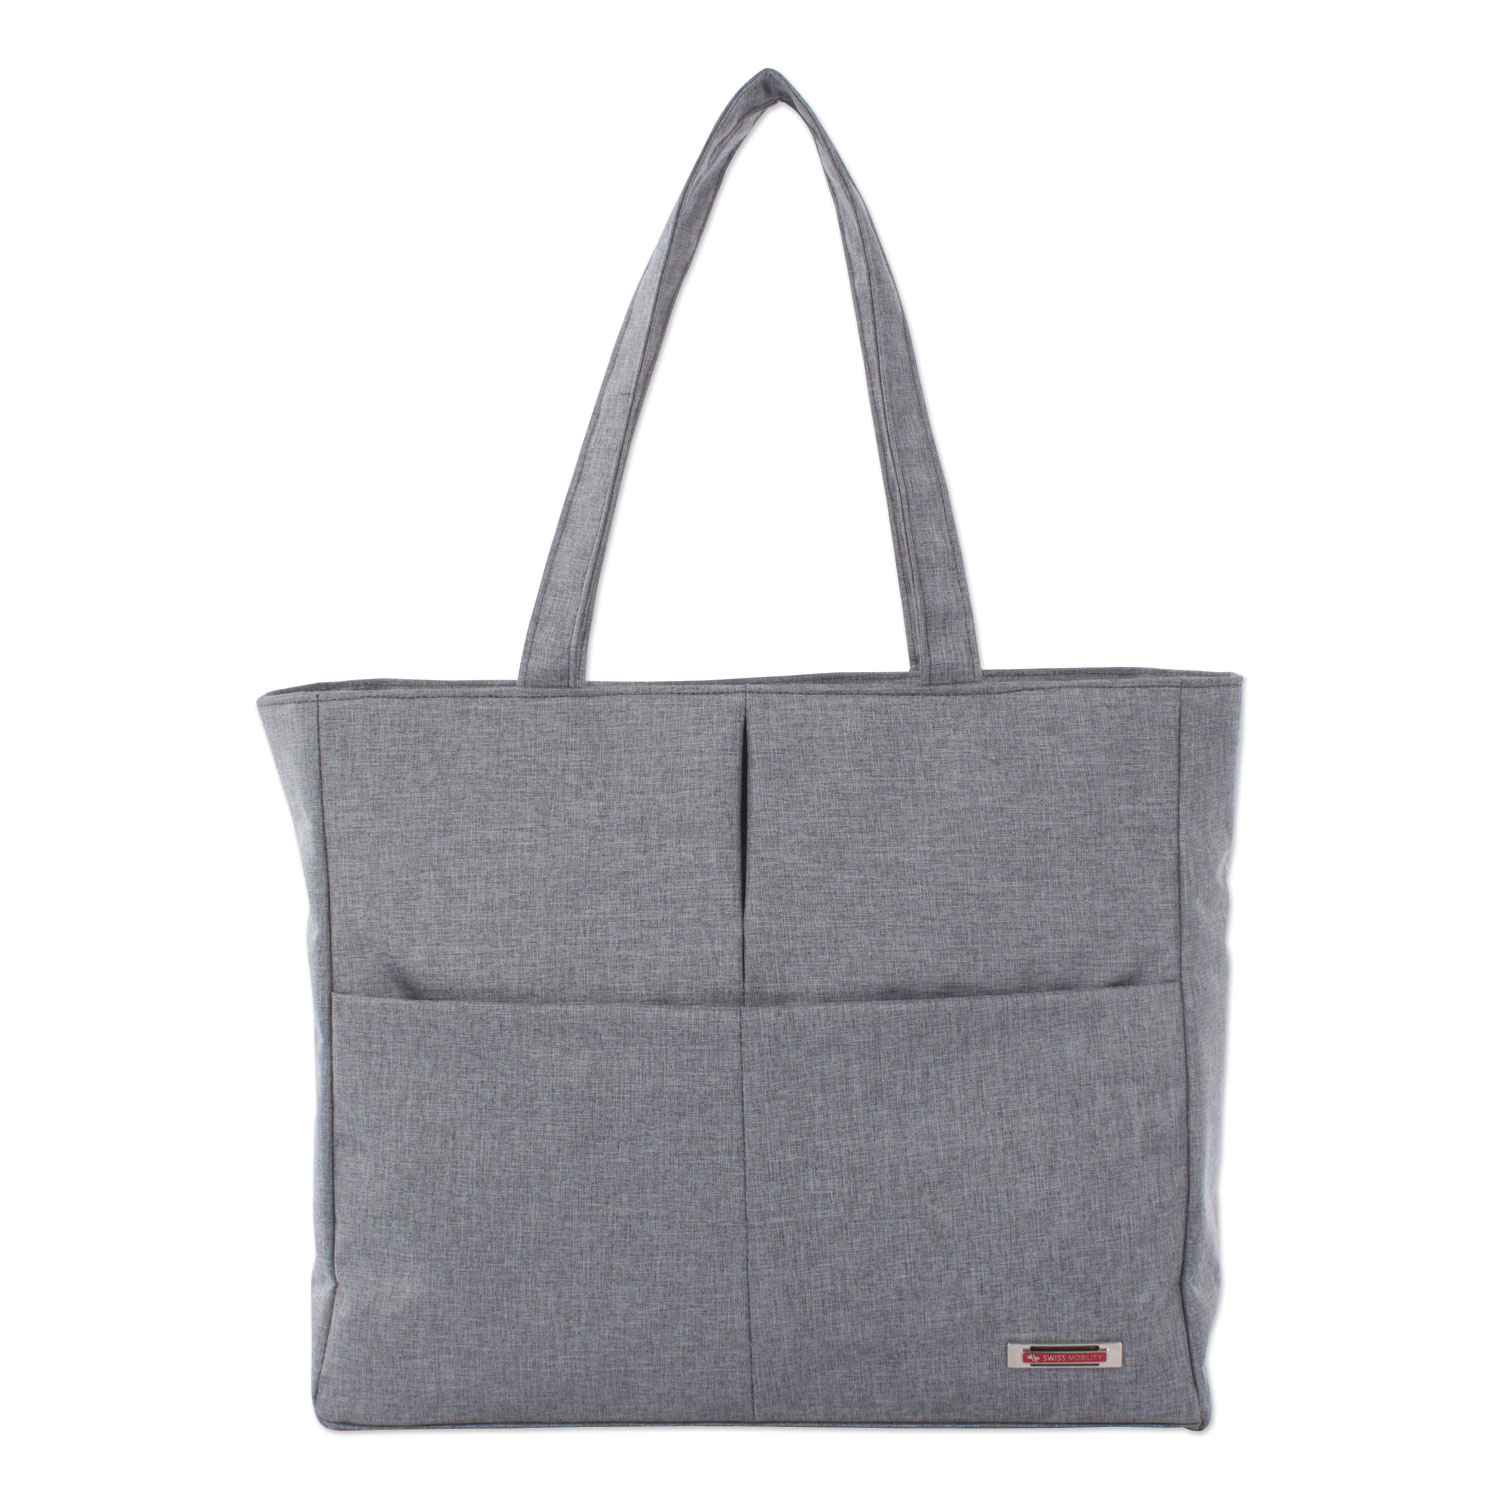  Swiss Mobility LBG1069SMGRY Sterling Ladies Tote Bag, Holds Laptops 15.6, 5.25 x 5.25 x 13.25, Gray (SWZLBG1069SMGRY) 